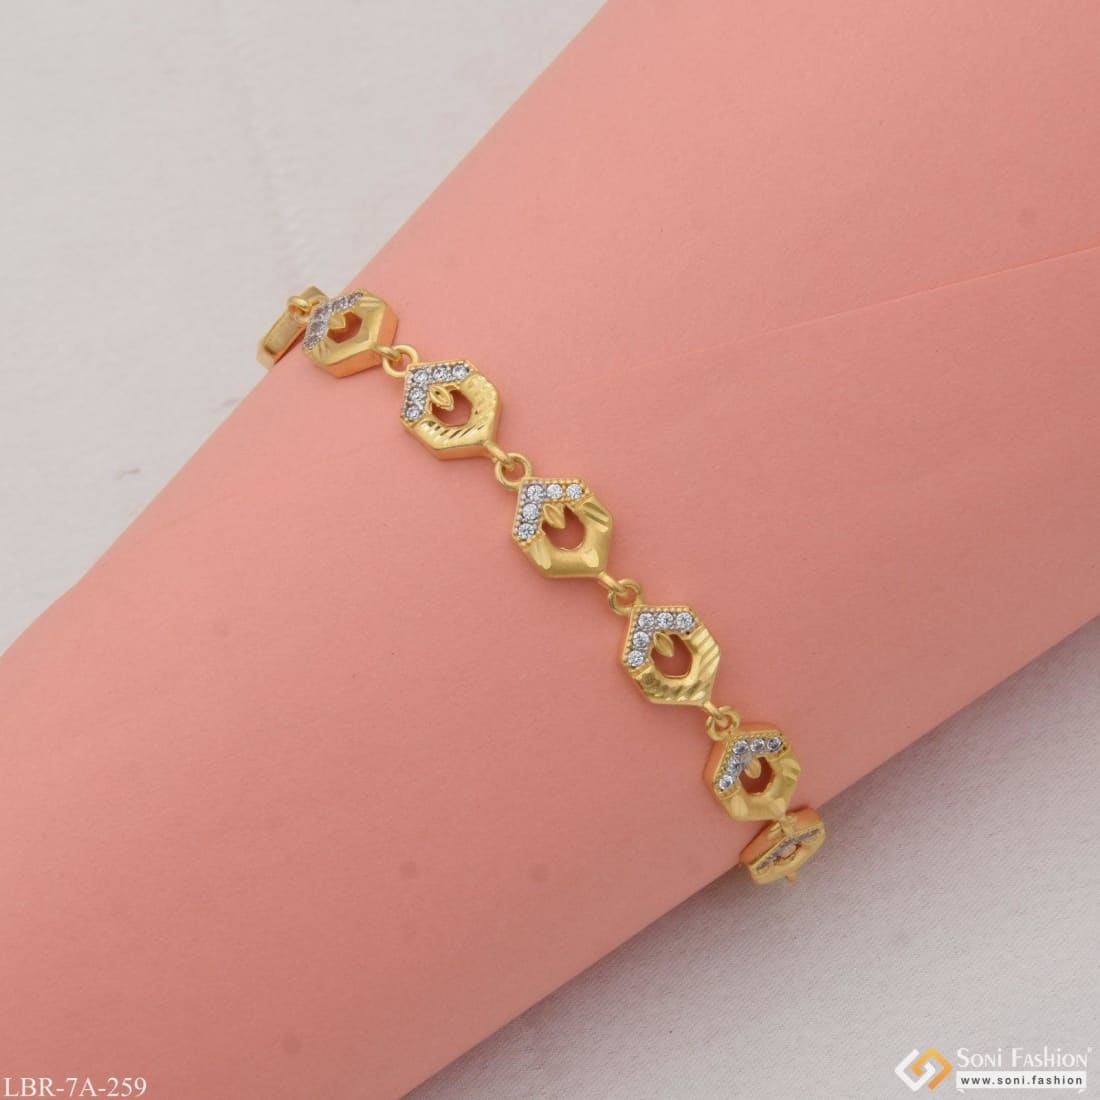 Latest Women Gold Bracelet Designs With Price And weight || Apsara Fashions  | Bridal gold jewellery designs, Gold bracelet for women, Bracelet designs